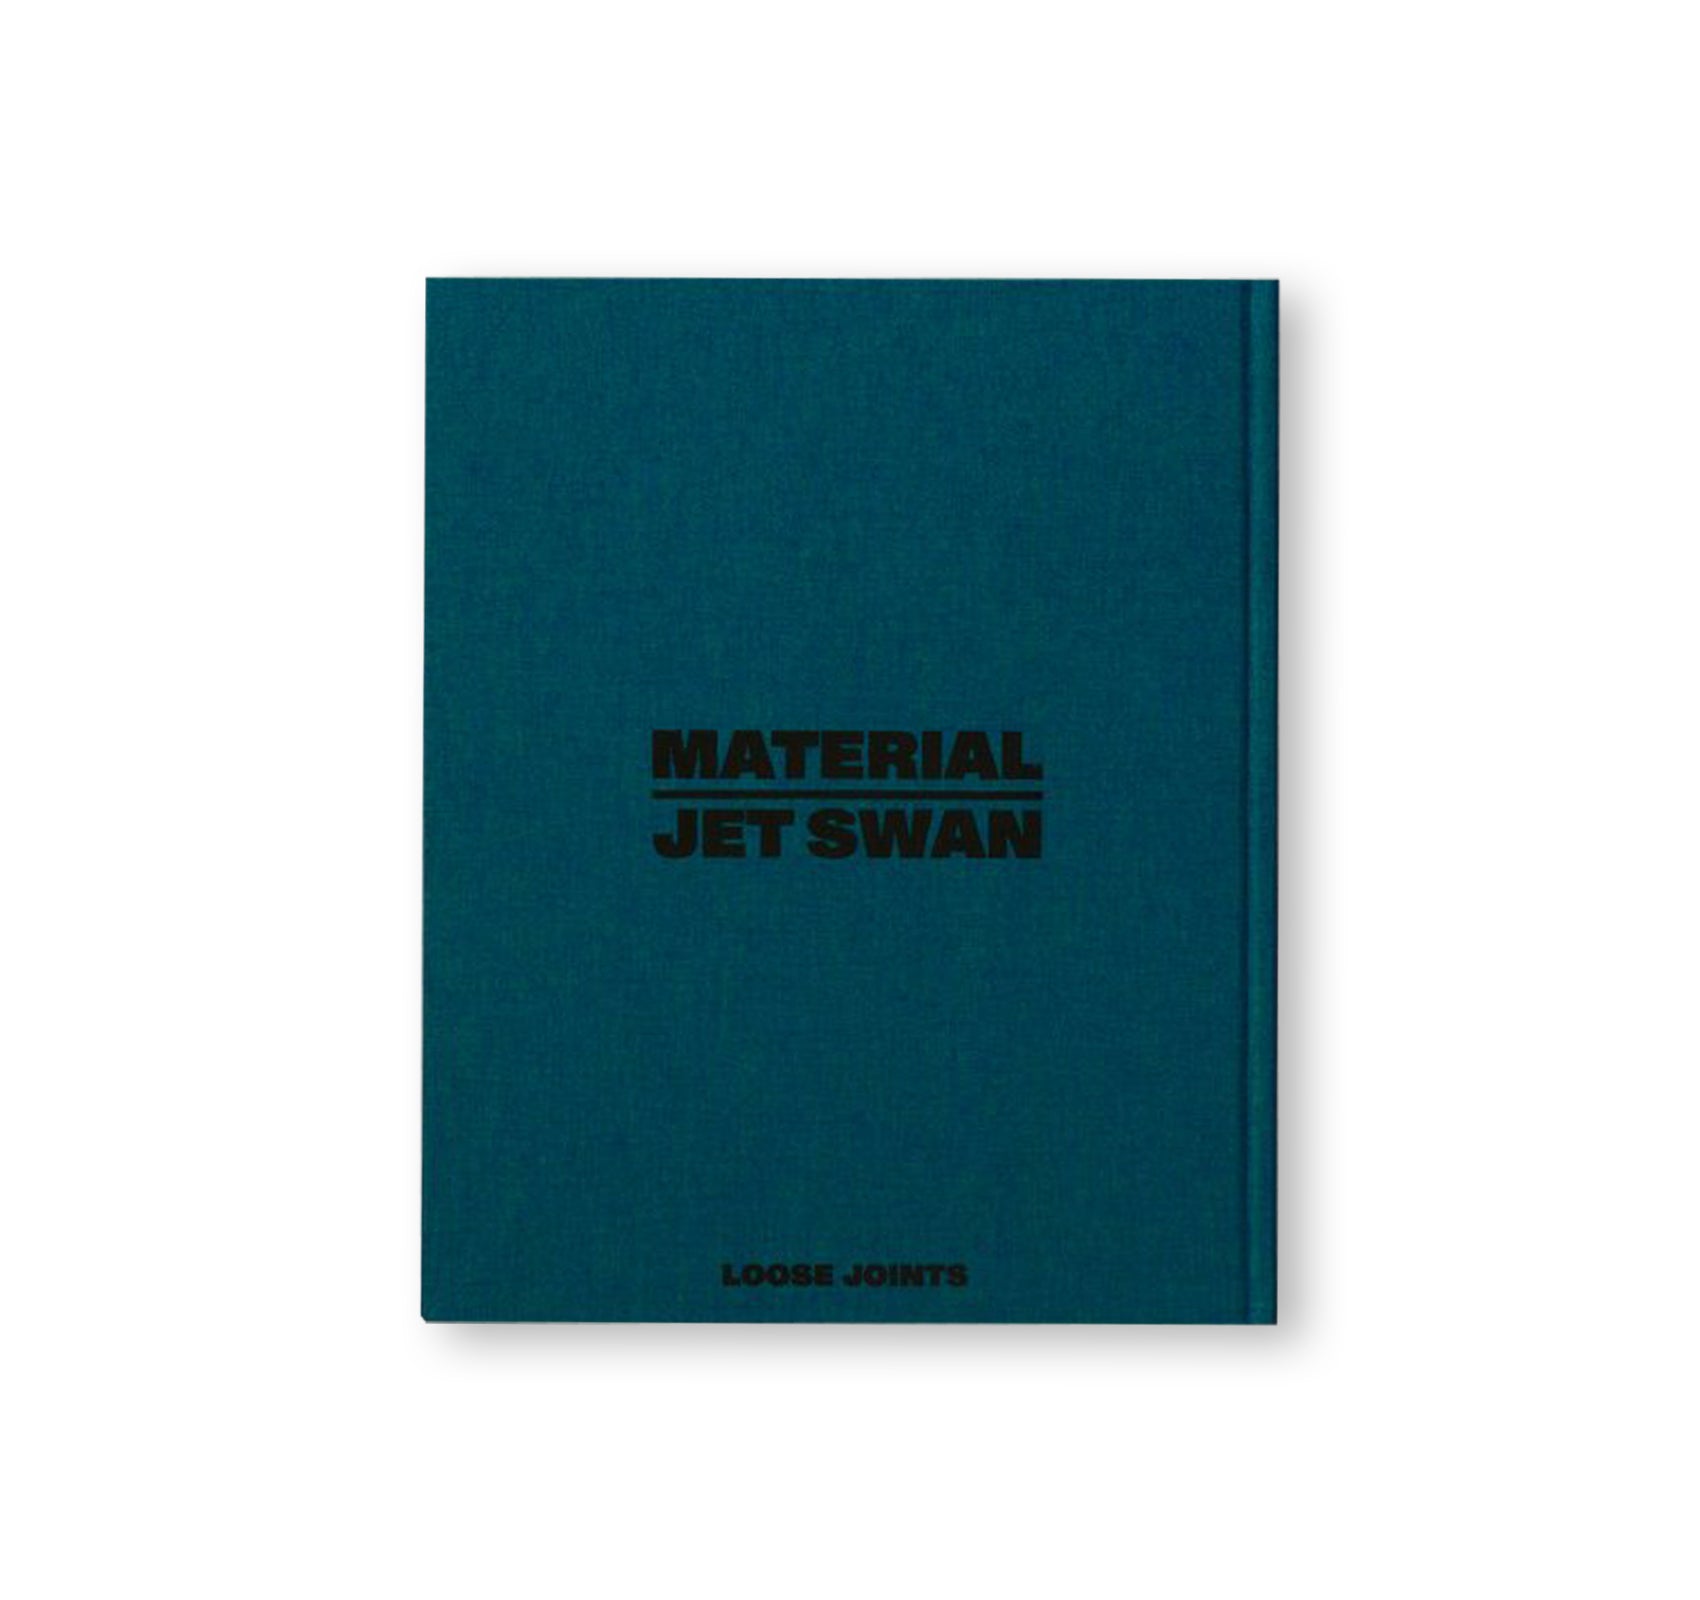 MATERIAL by Jet Swan